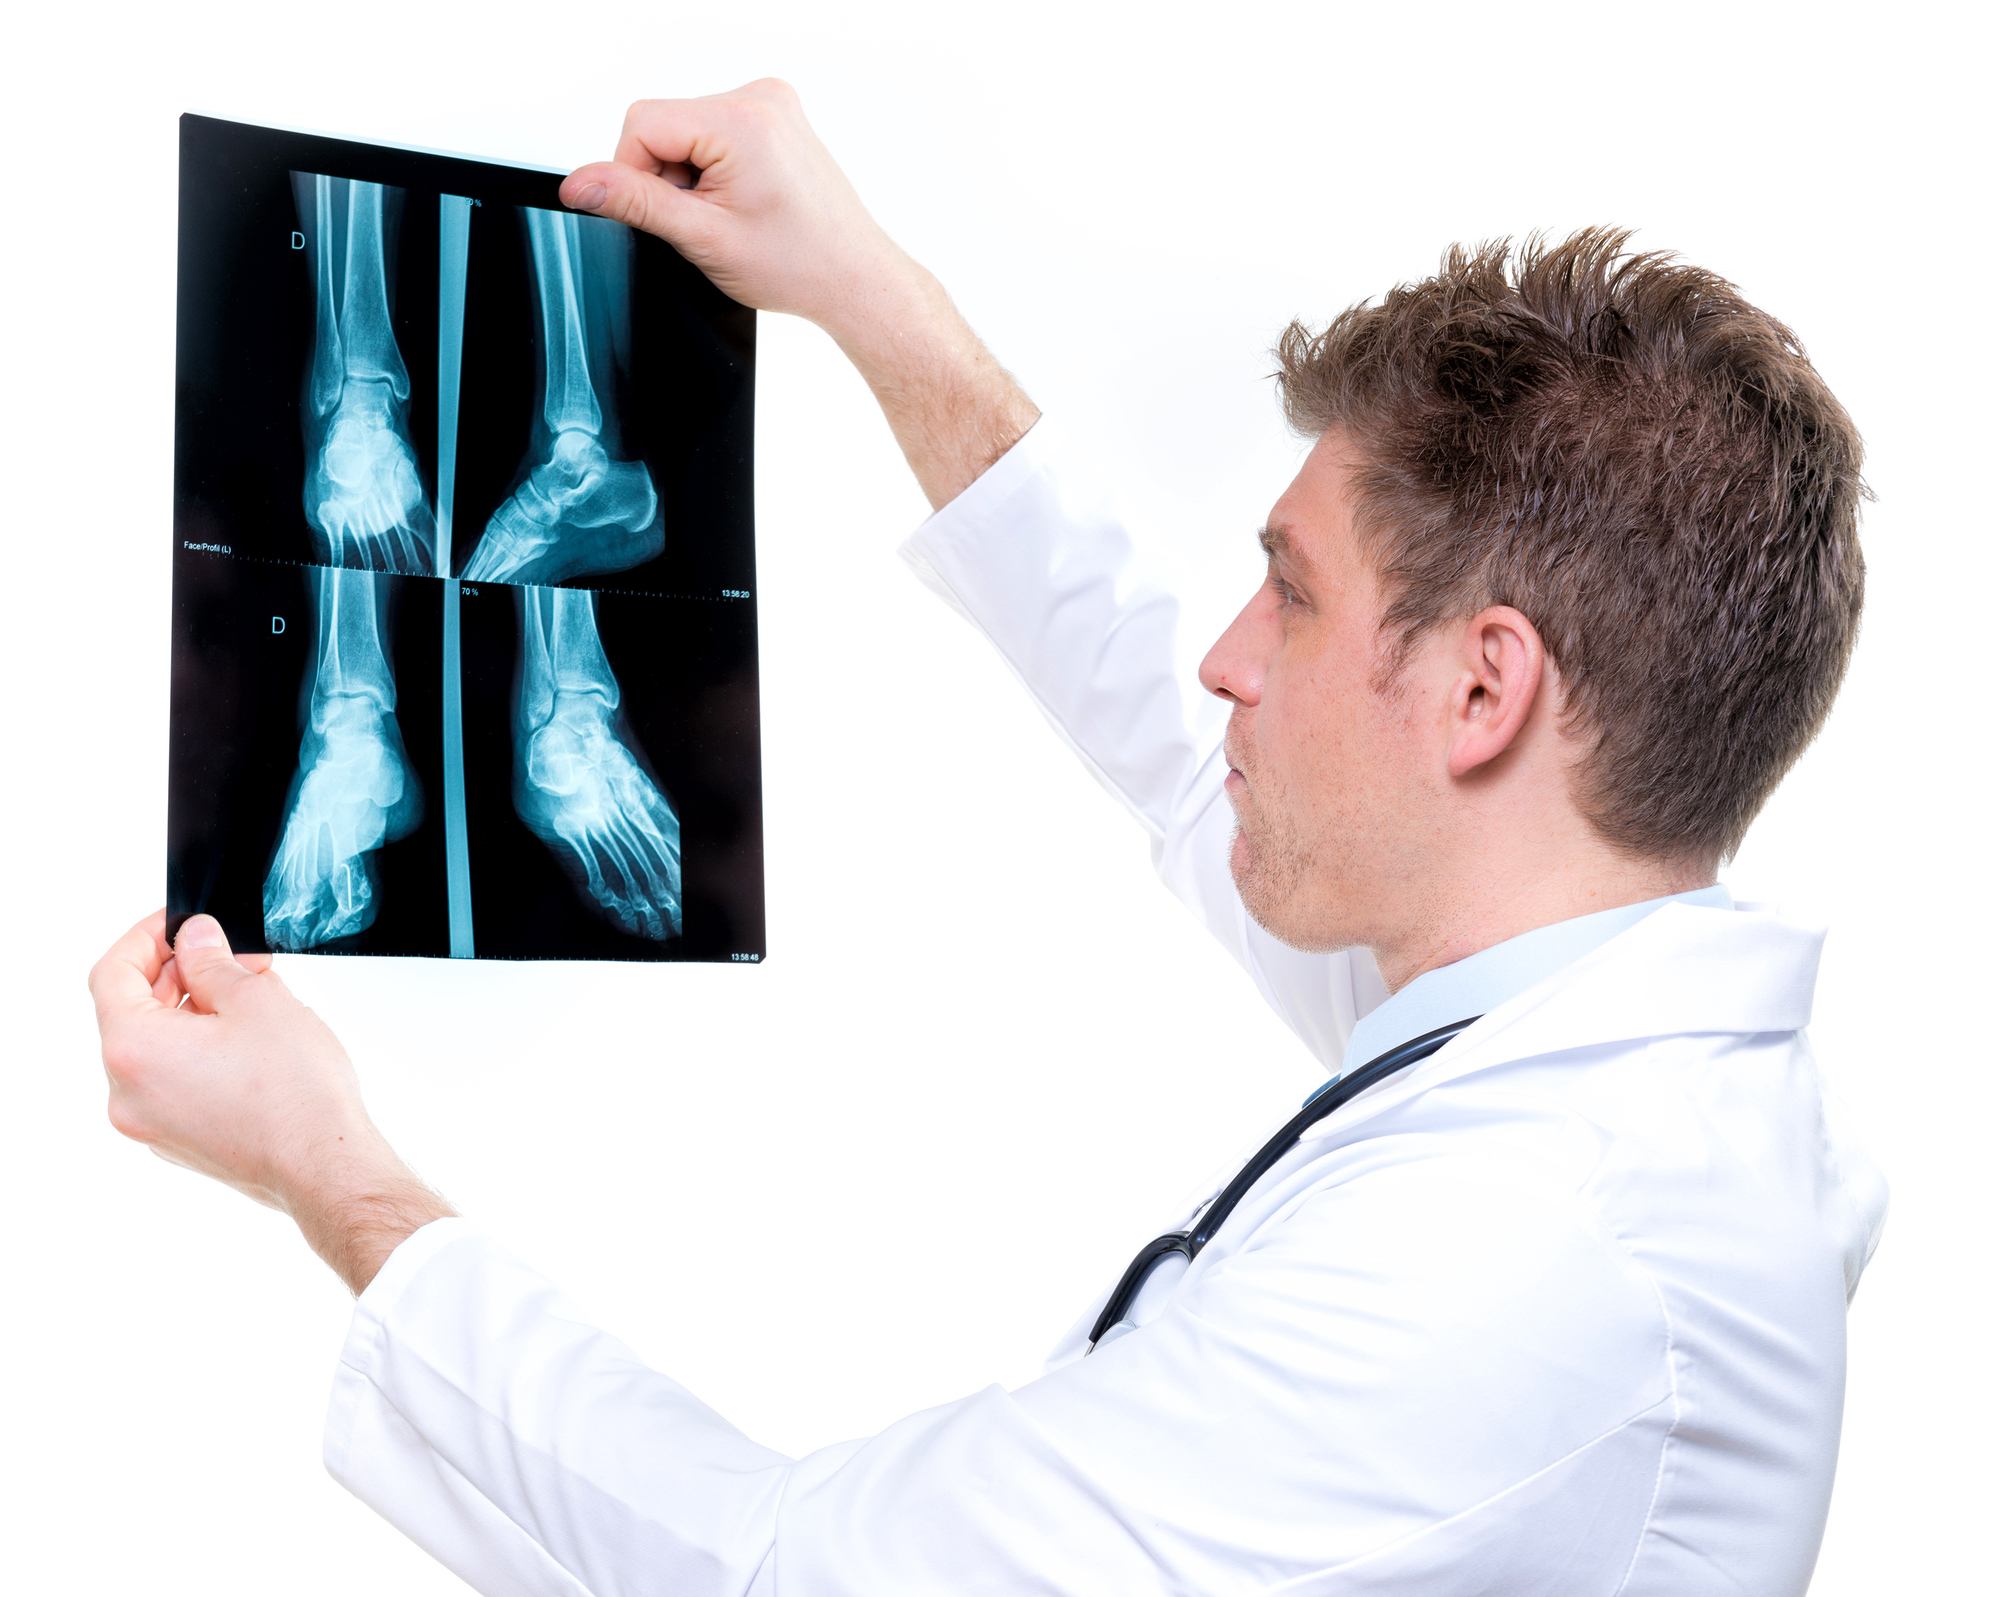 Podiatrist Reviewing an X-ray